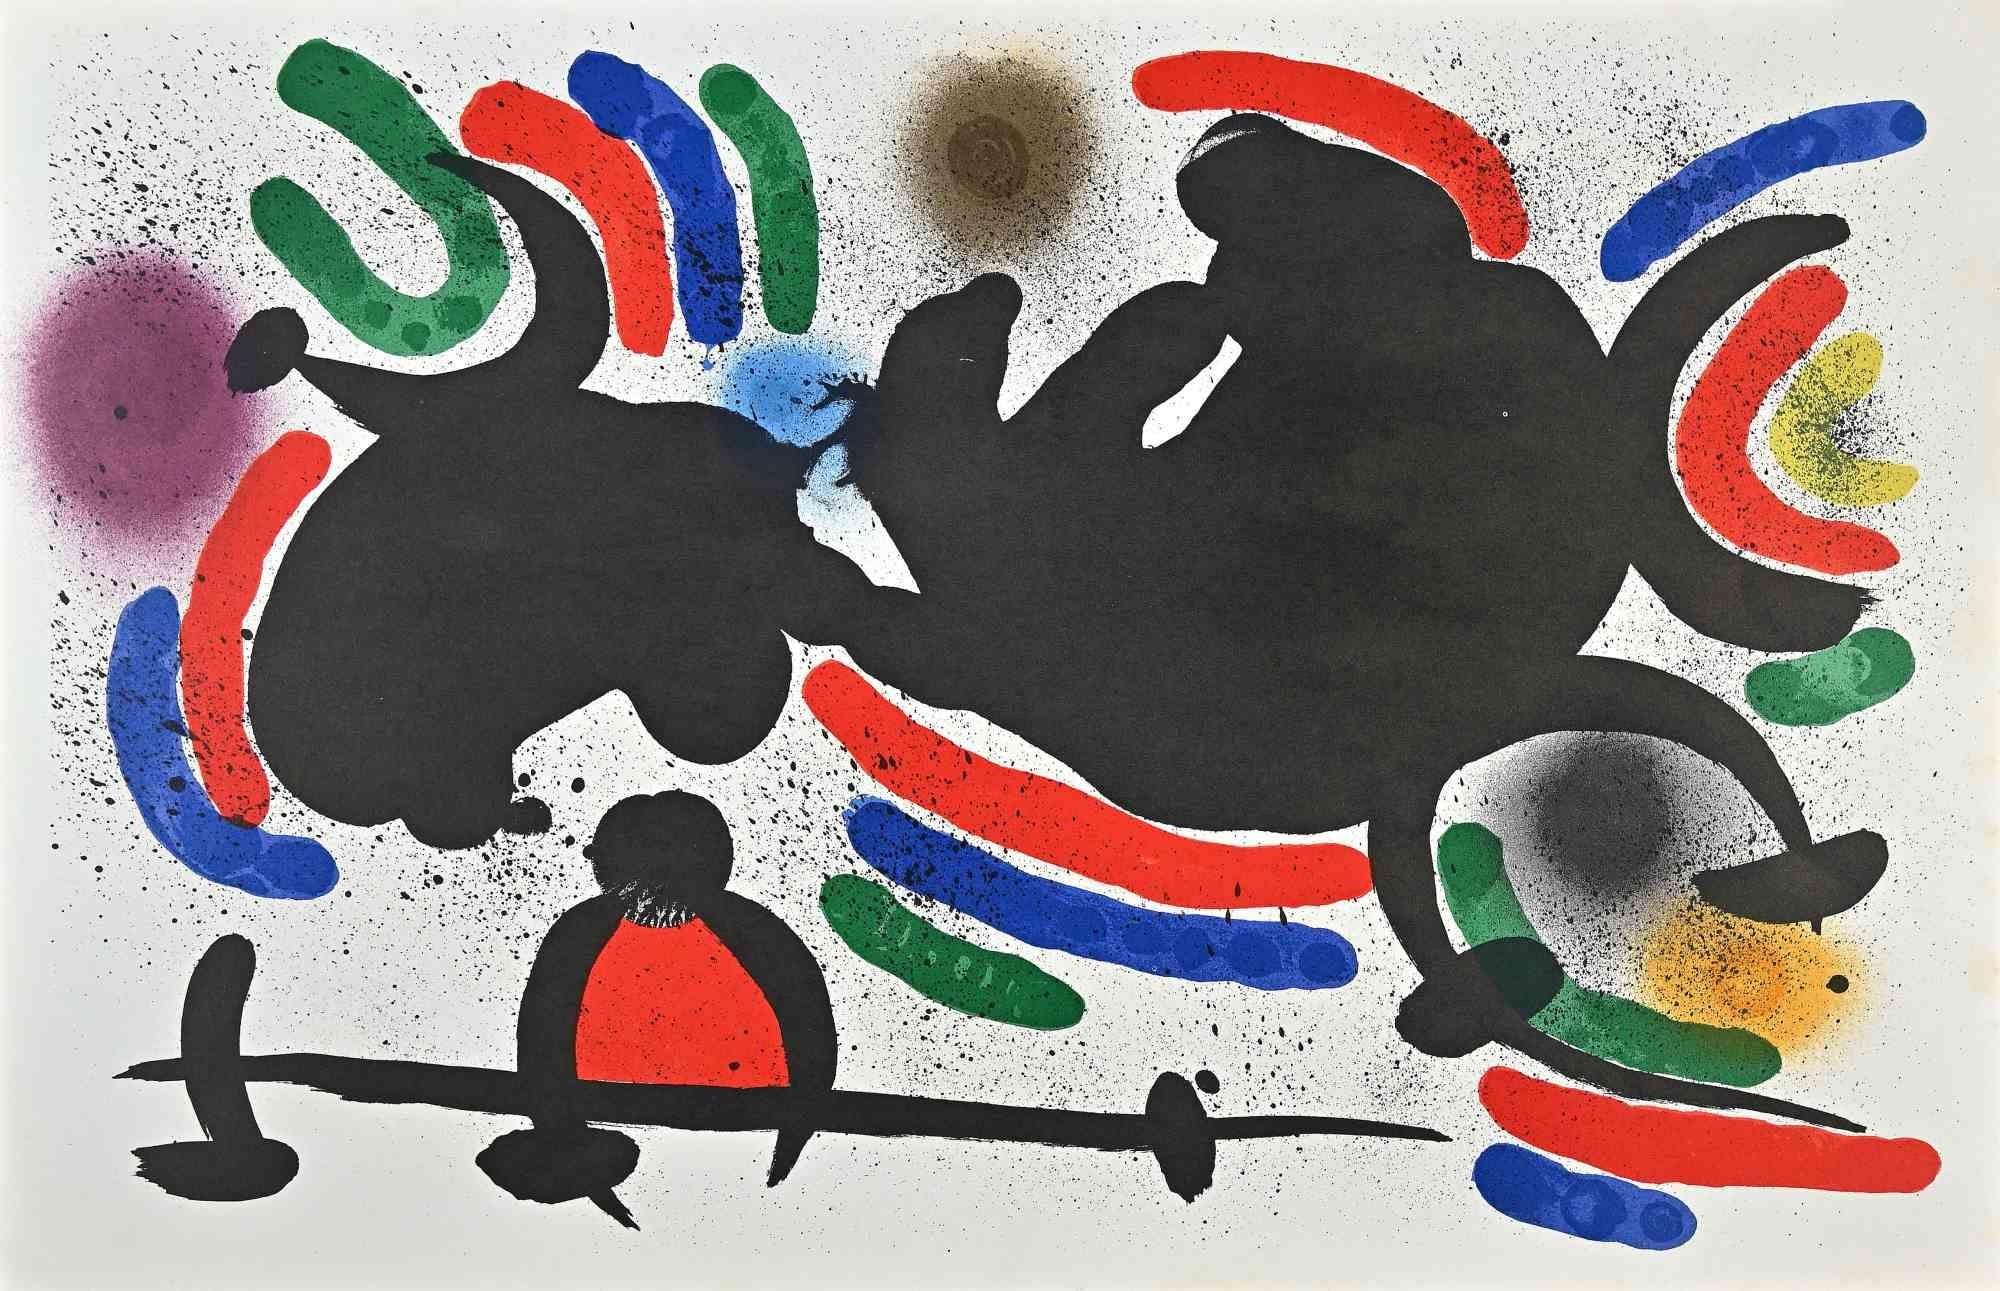 Joan Miró Abstract Print - Abstract Composition - Lithograph by J. Mirò - Mid-20th Century